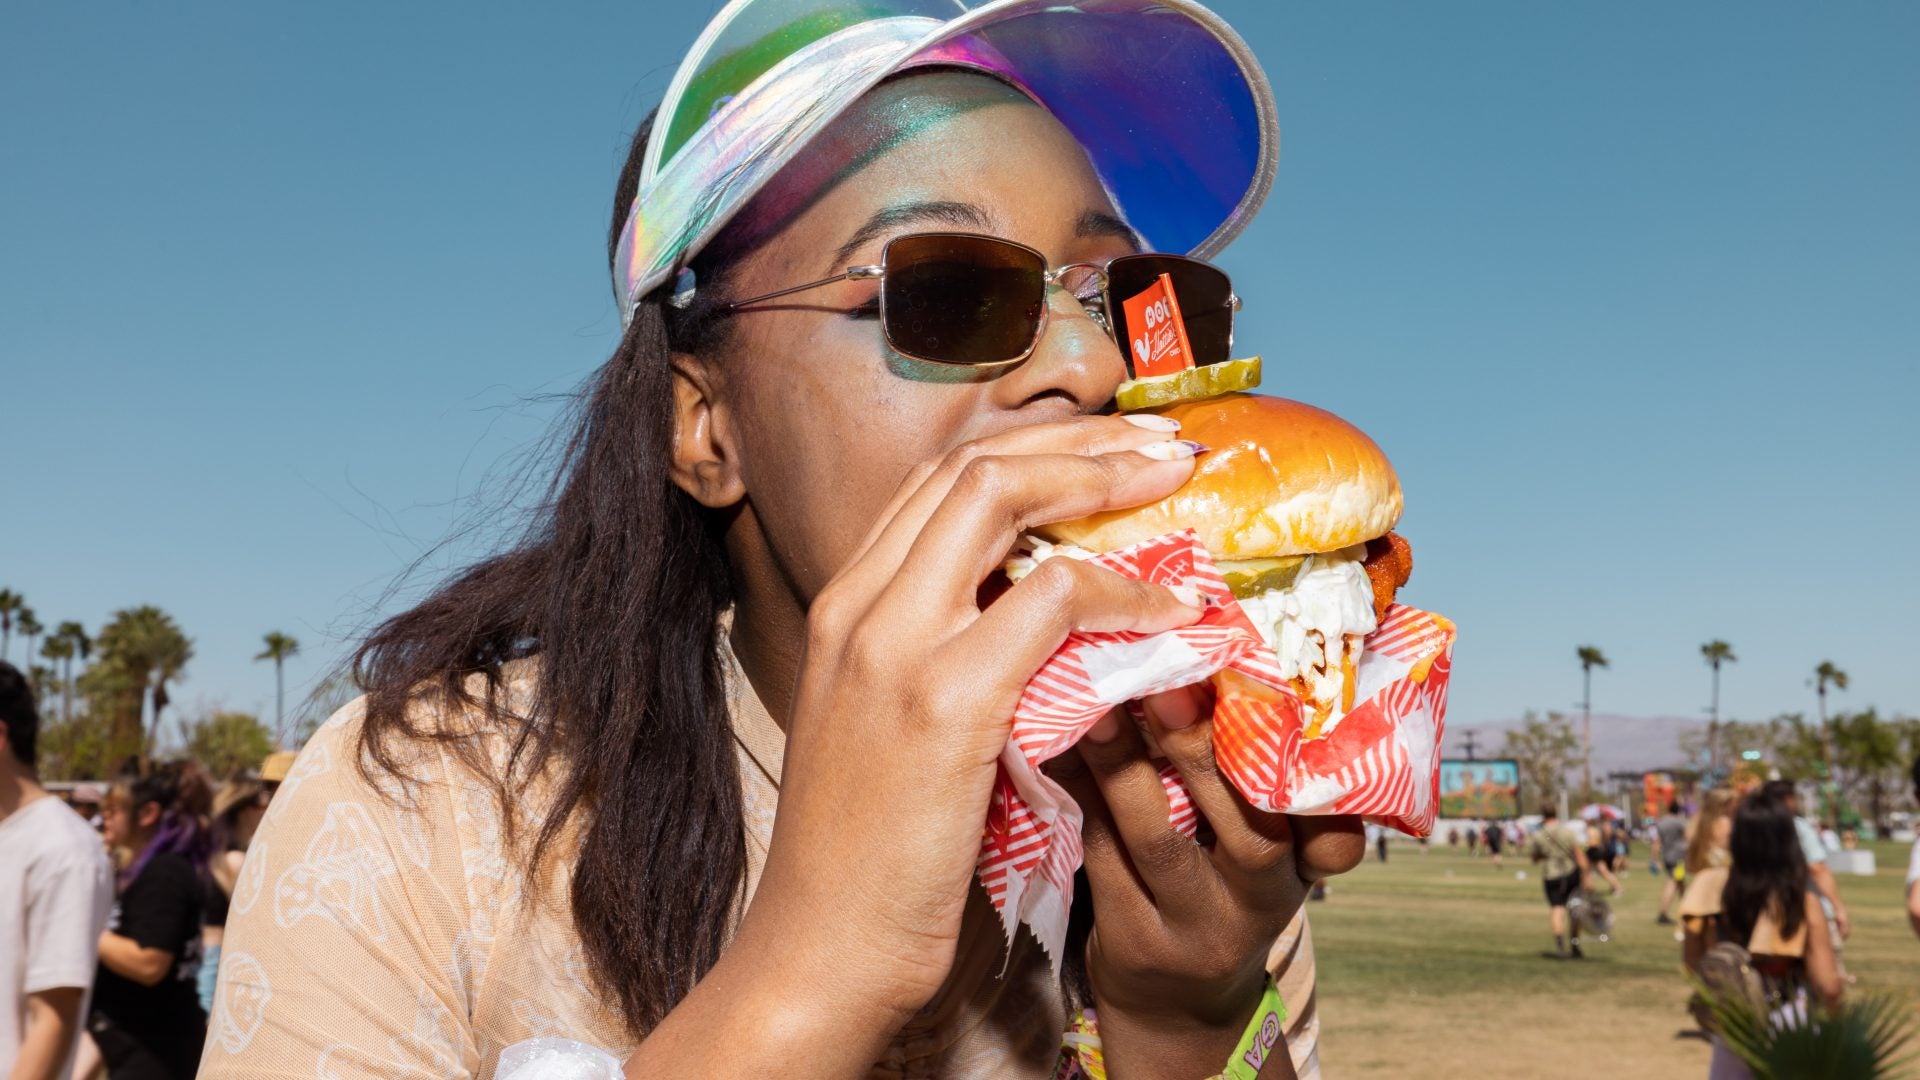 Music And Food Were The Perfect Pairing At This Year’s Coachella